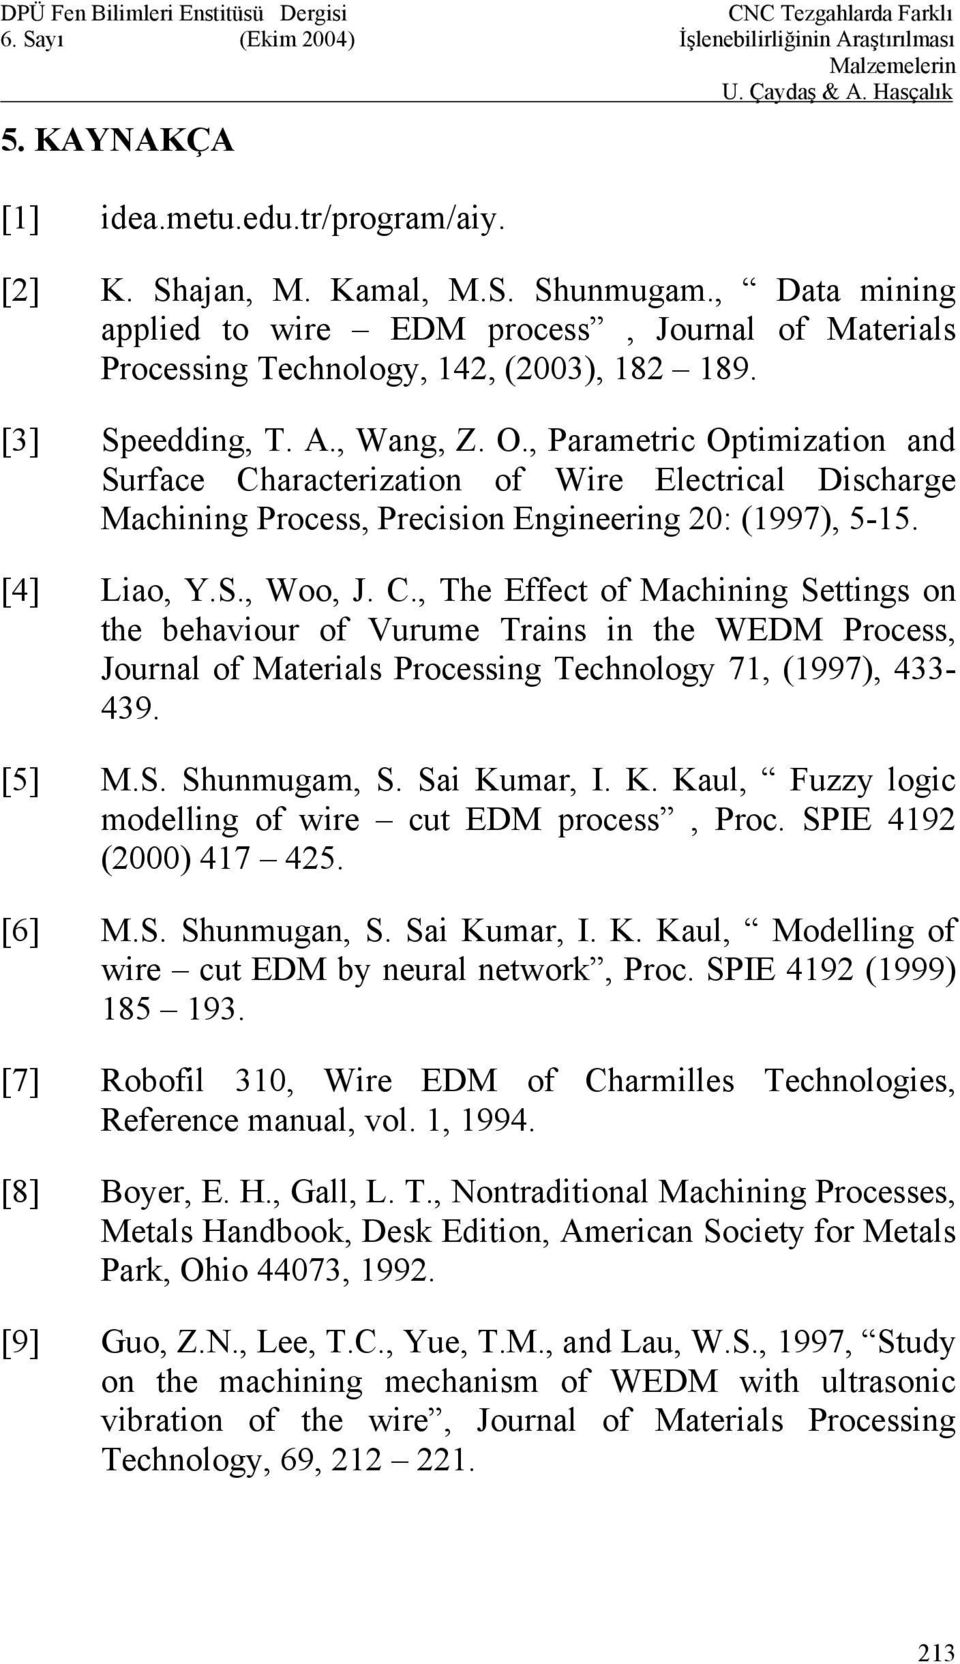 C., The Effect of Machining Settings on the behaviour of Vurume Trains in the WEDM Process, Journal of Materials Processing Technology 71, (1997), 433-439. [5] M.S. Shunmugam, S. Sai Ku